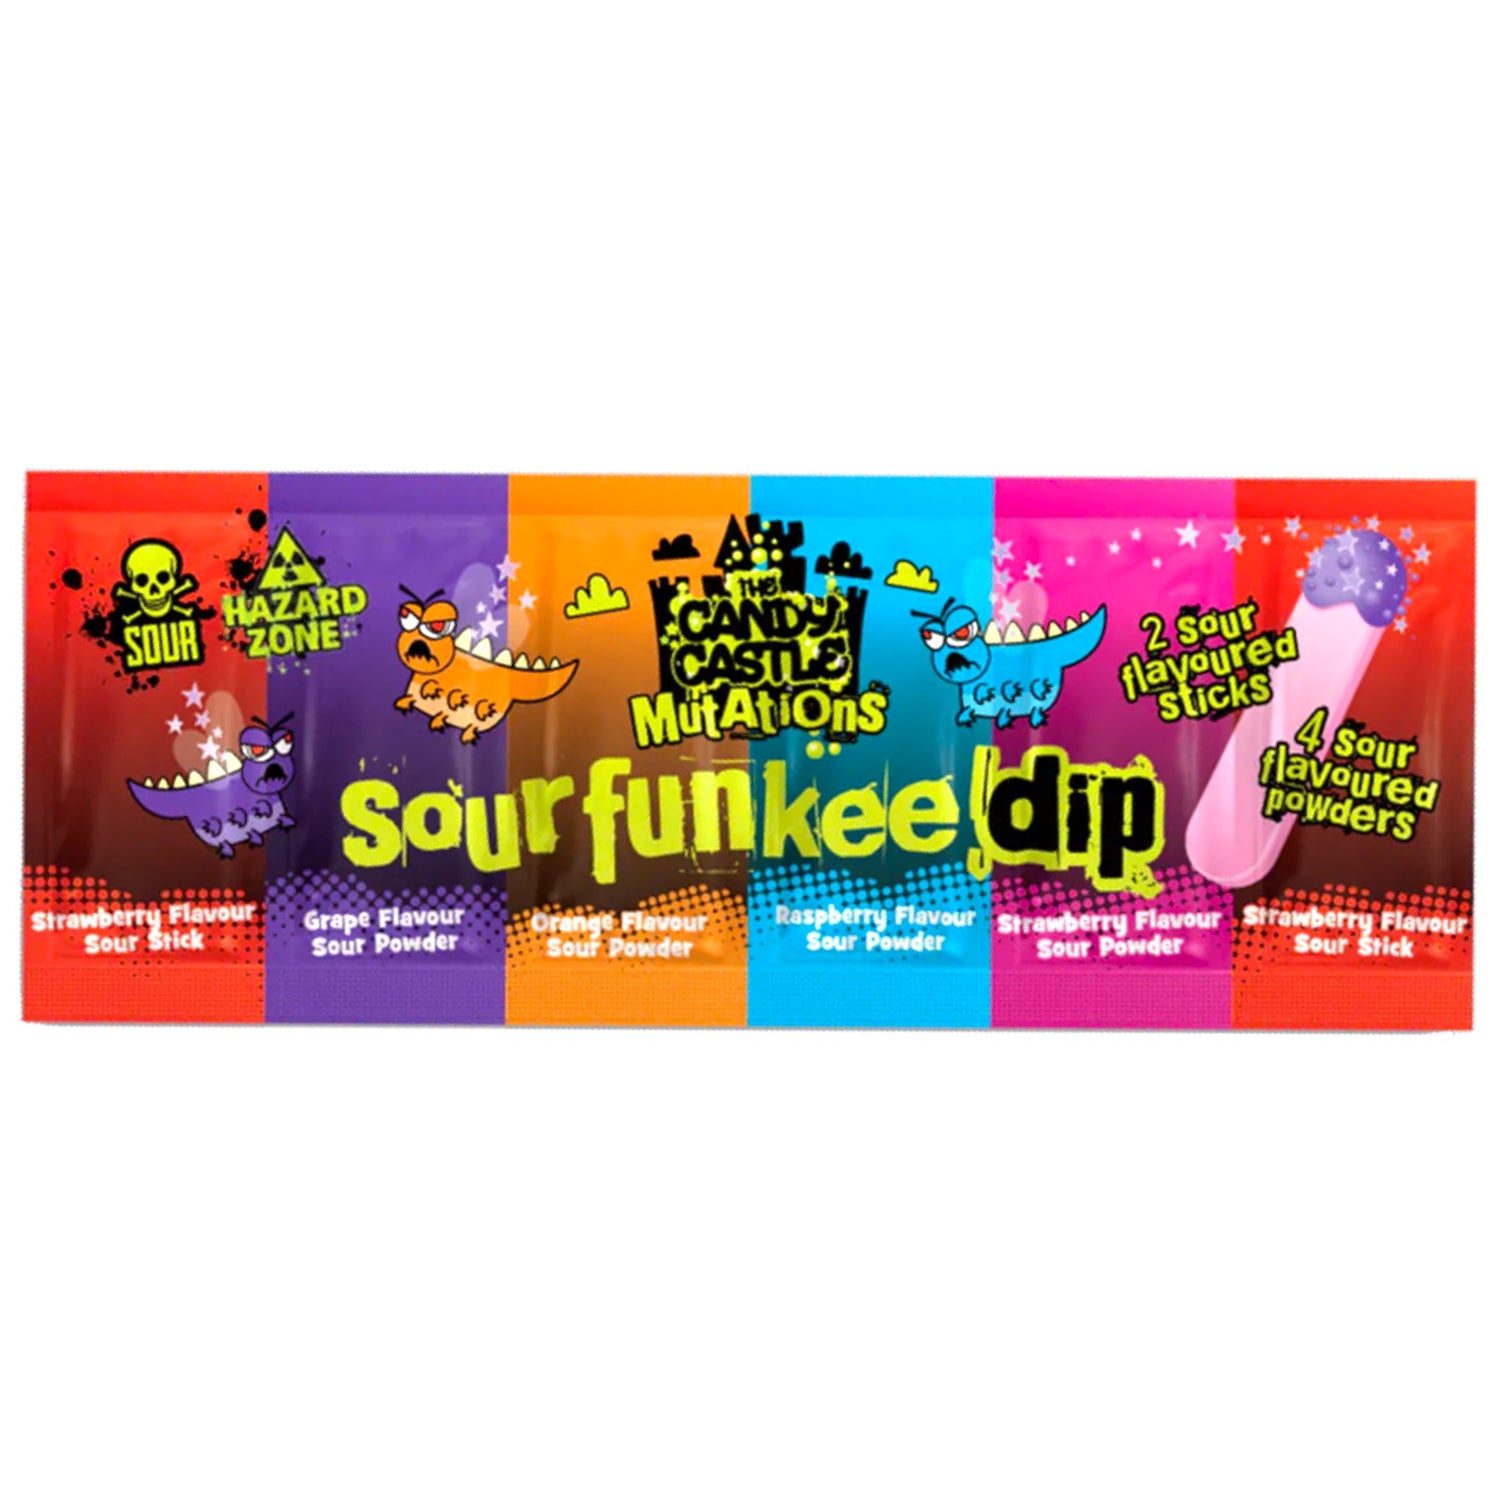 Candy Castle Mutations Sour Funkee Dip